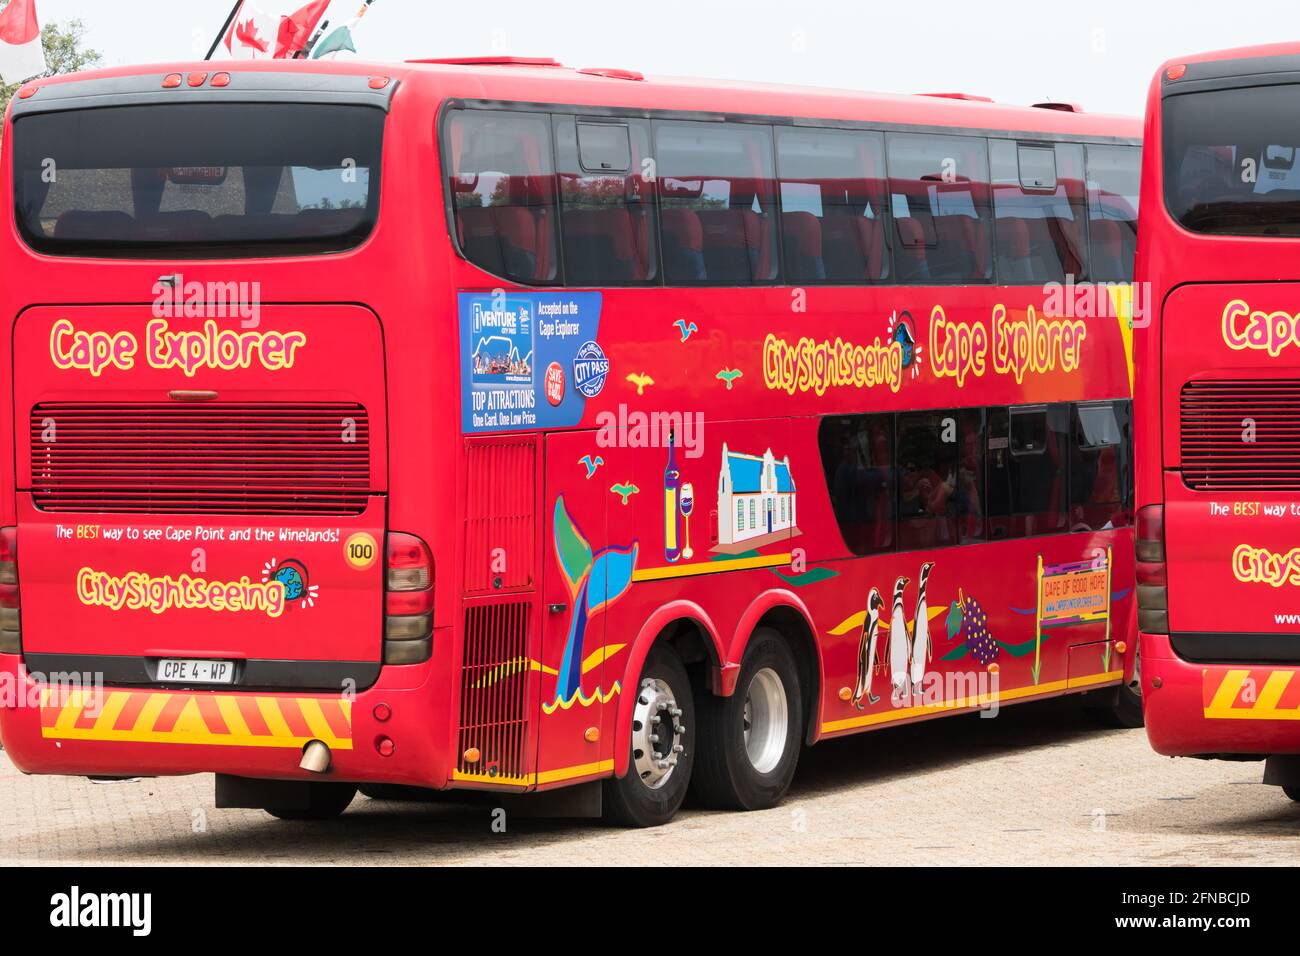 City sightseeing red busses, Cape Explorer tourist busses, Cape Town, South Africa concept tourism and travel Stock Photo